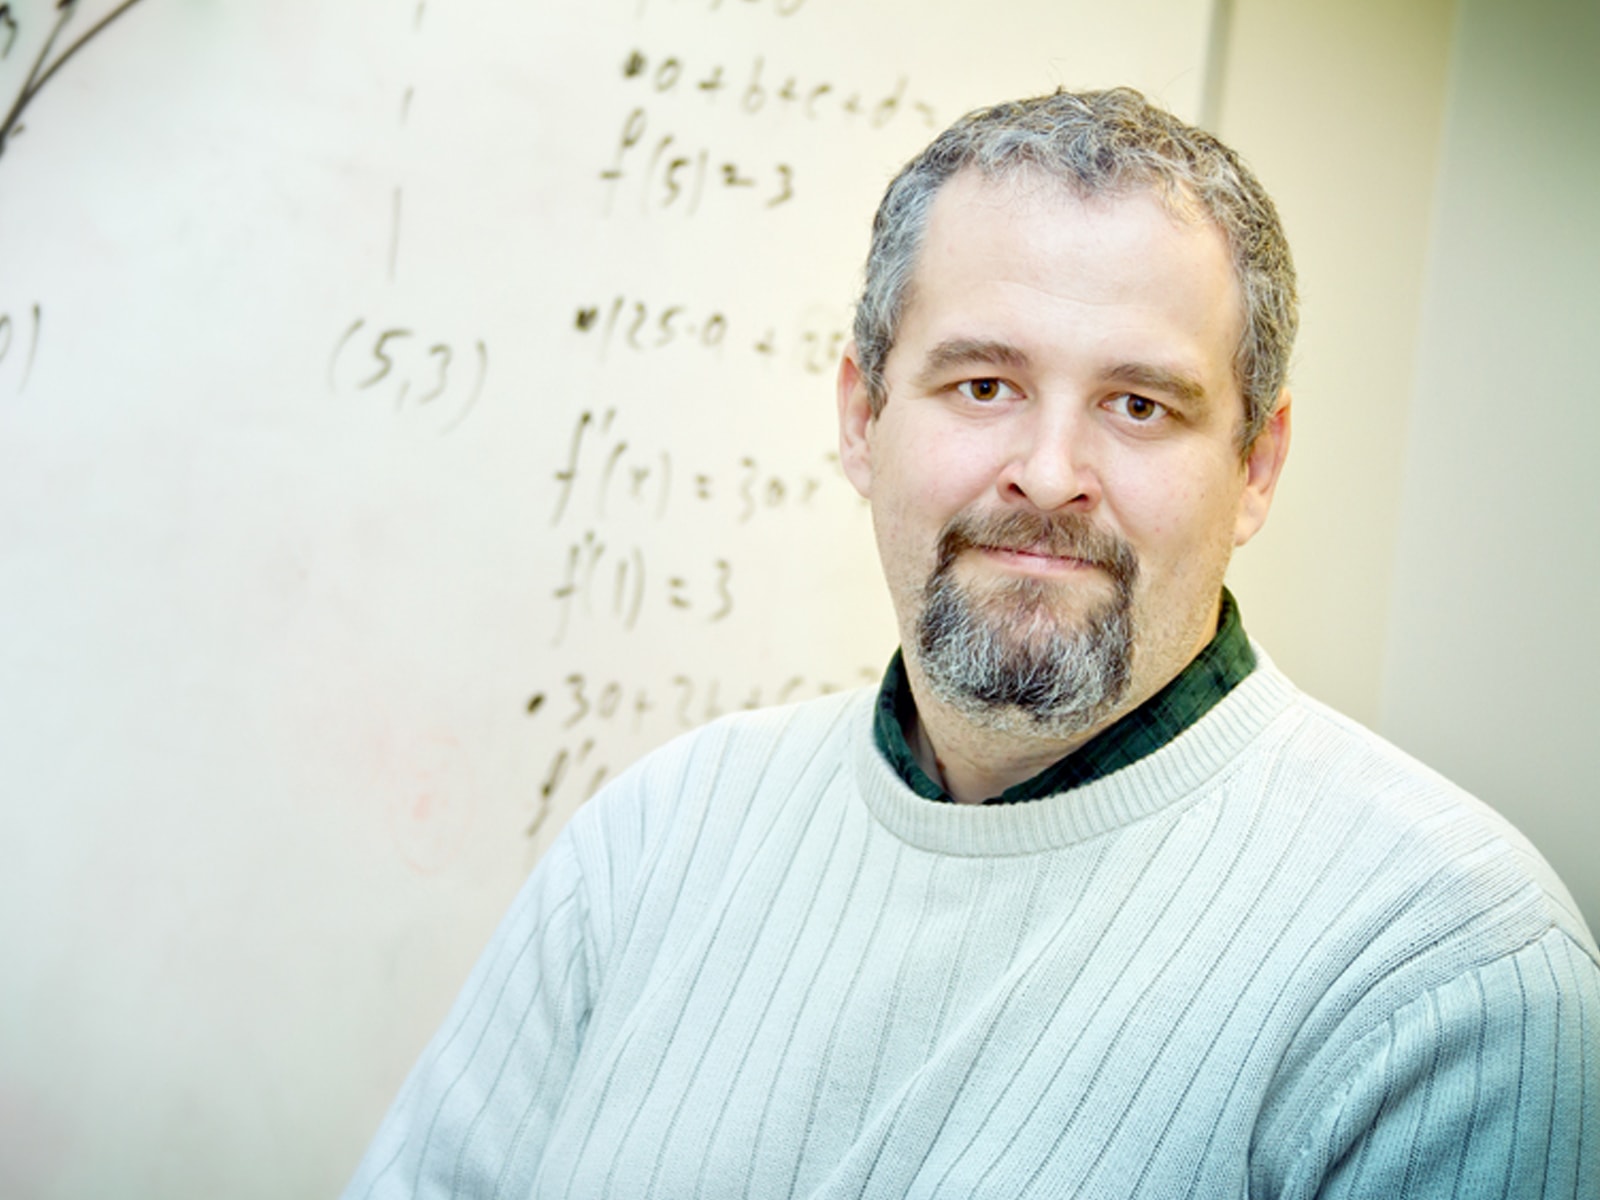 DigiPen mathematics professor Barnabas Bede smiling in front of a whiteboard decorated with mathematical formulas